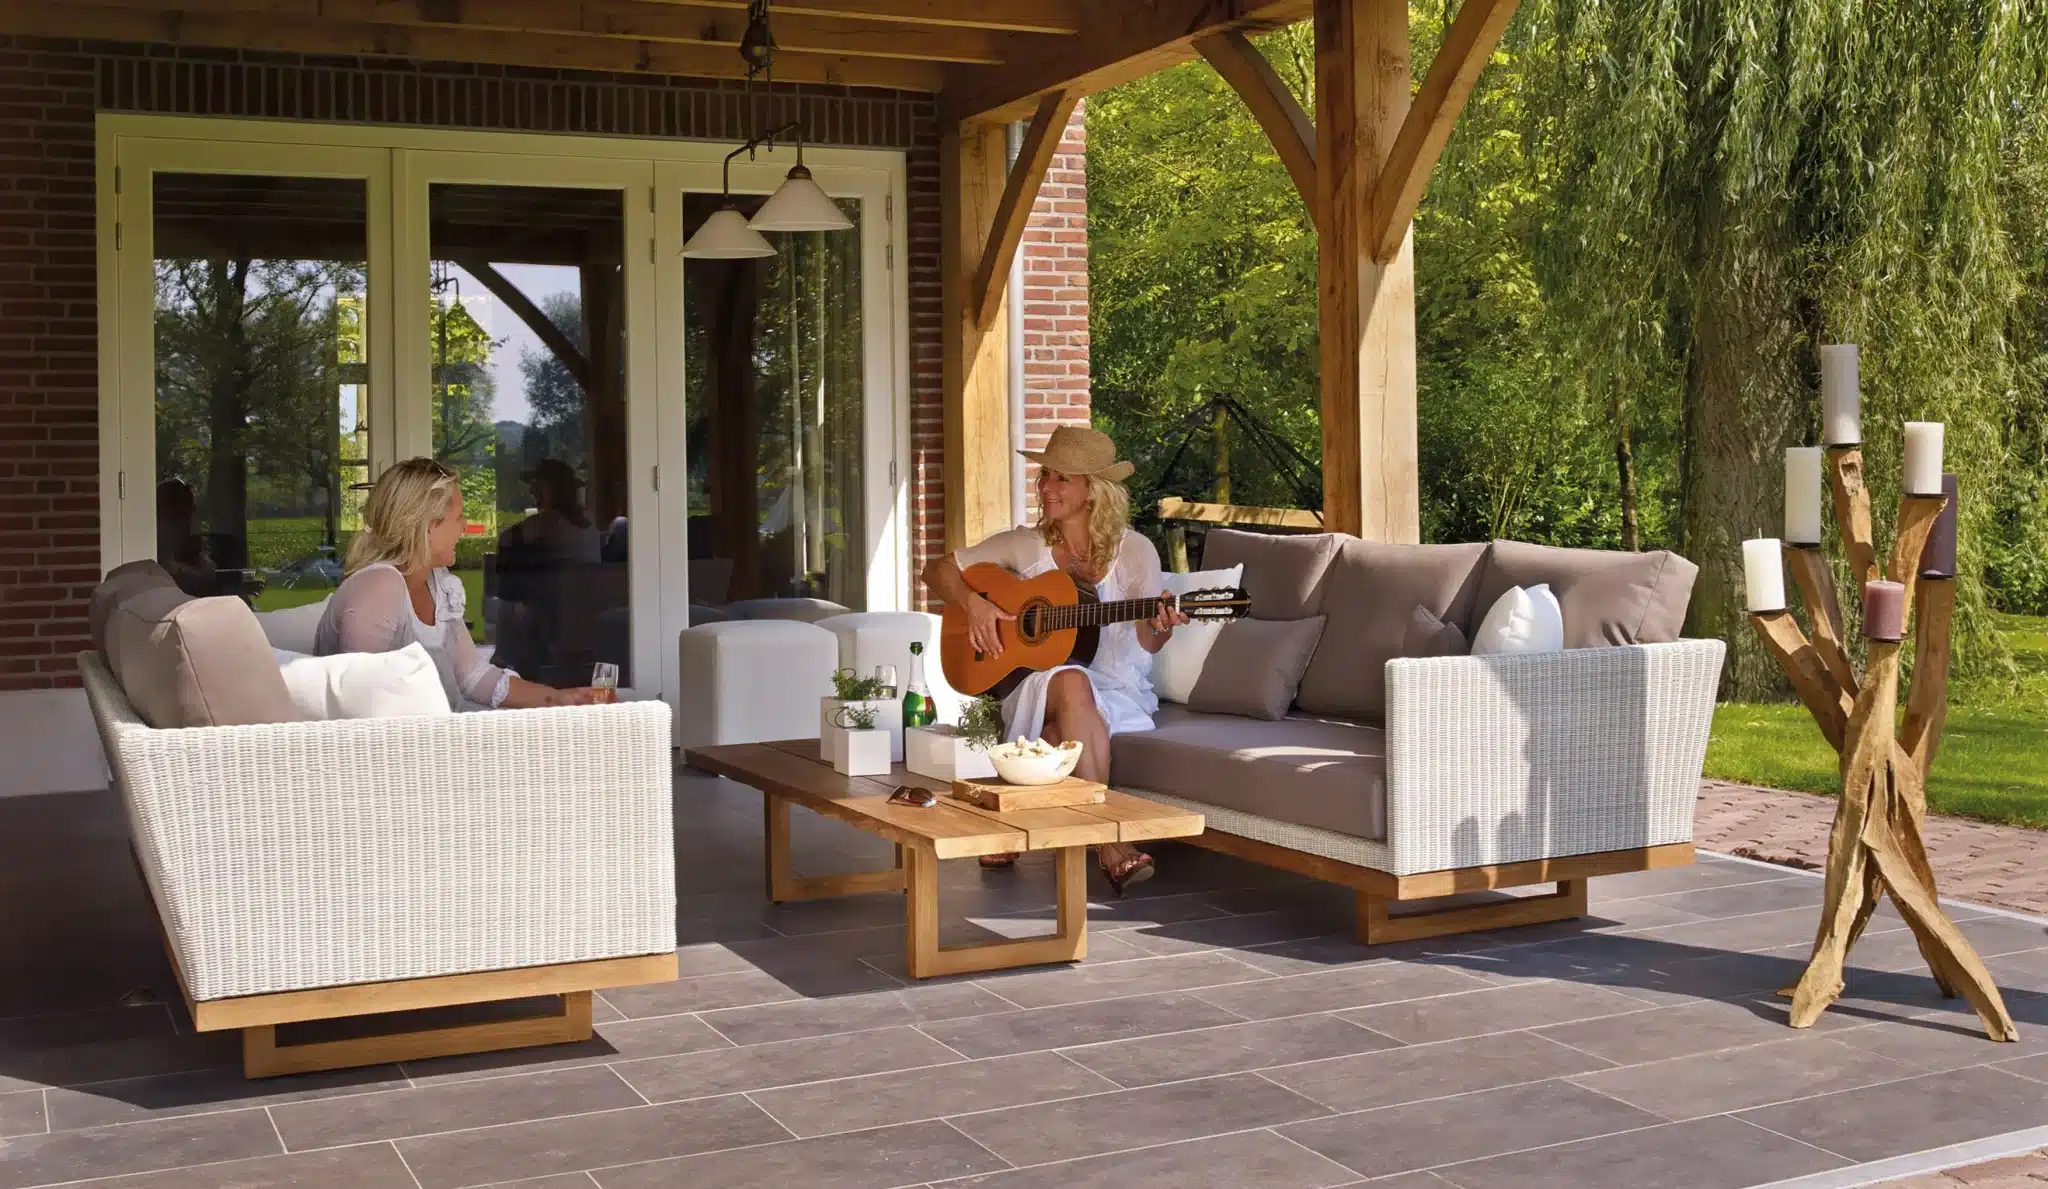 4 Reasons to Have a Patio in Your Backyard